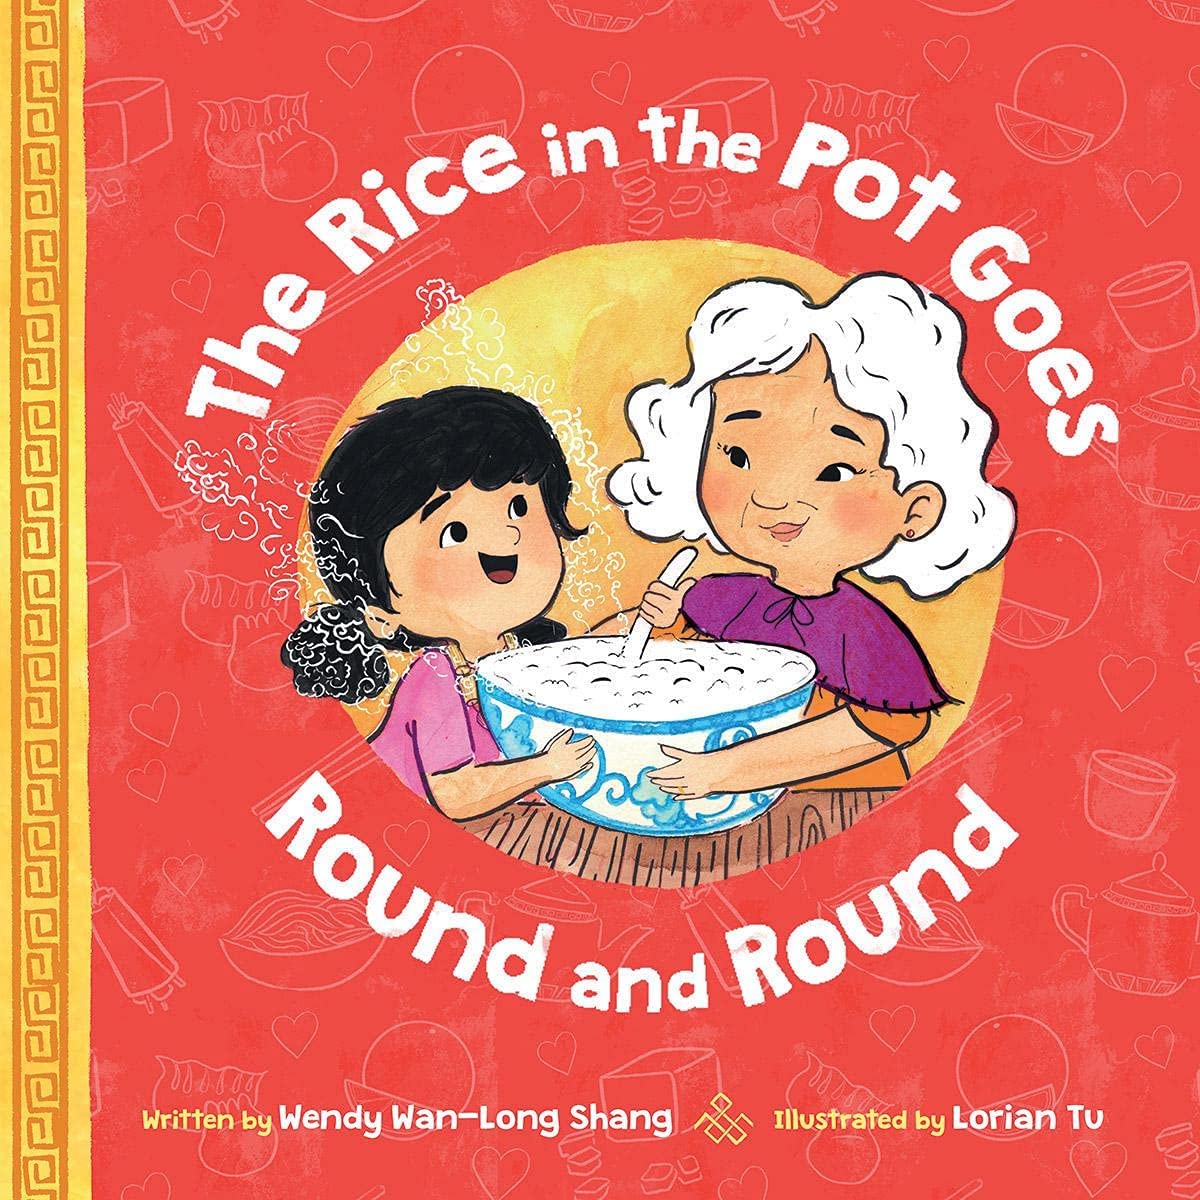 The Rice in the Pot book cover